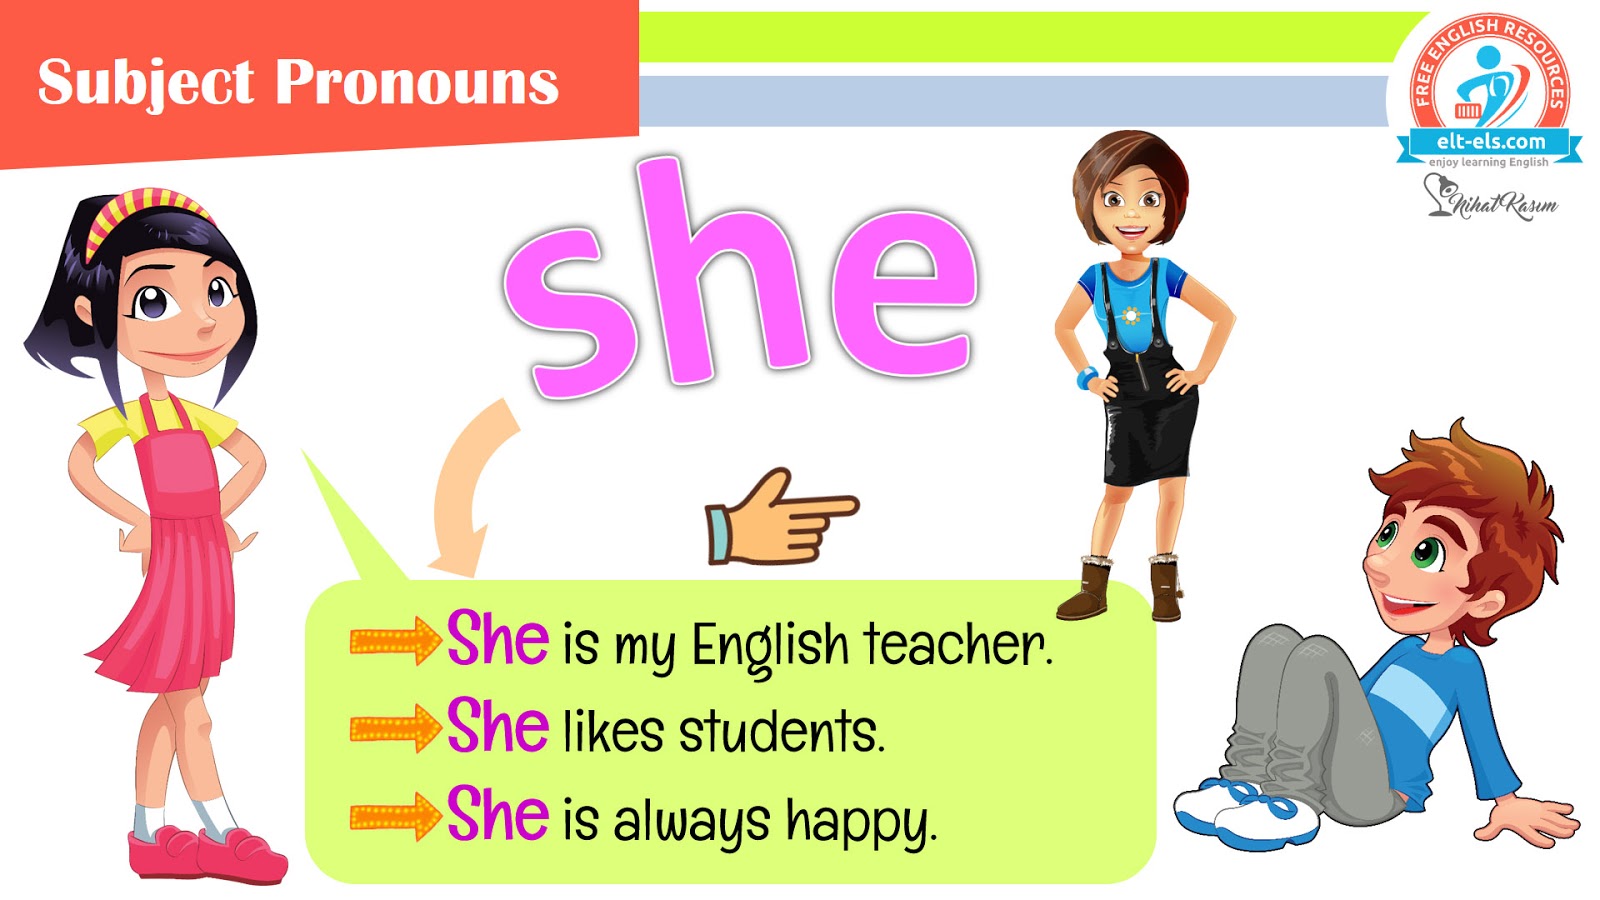 Subject subject an interesting subject. Subject pronouns. Lesson subject разница. Subject a5. Video Lesson.